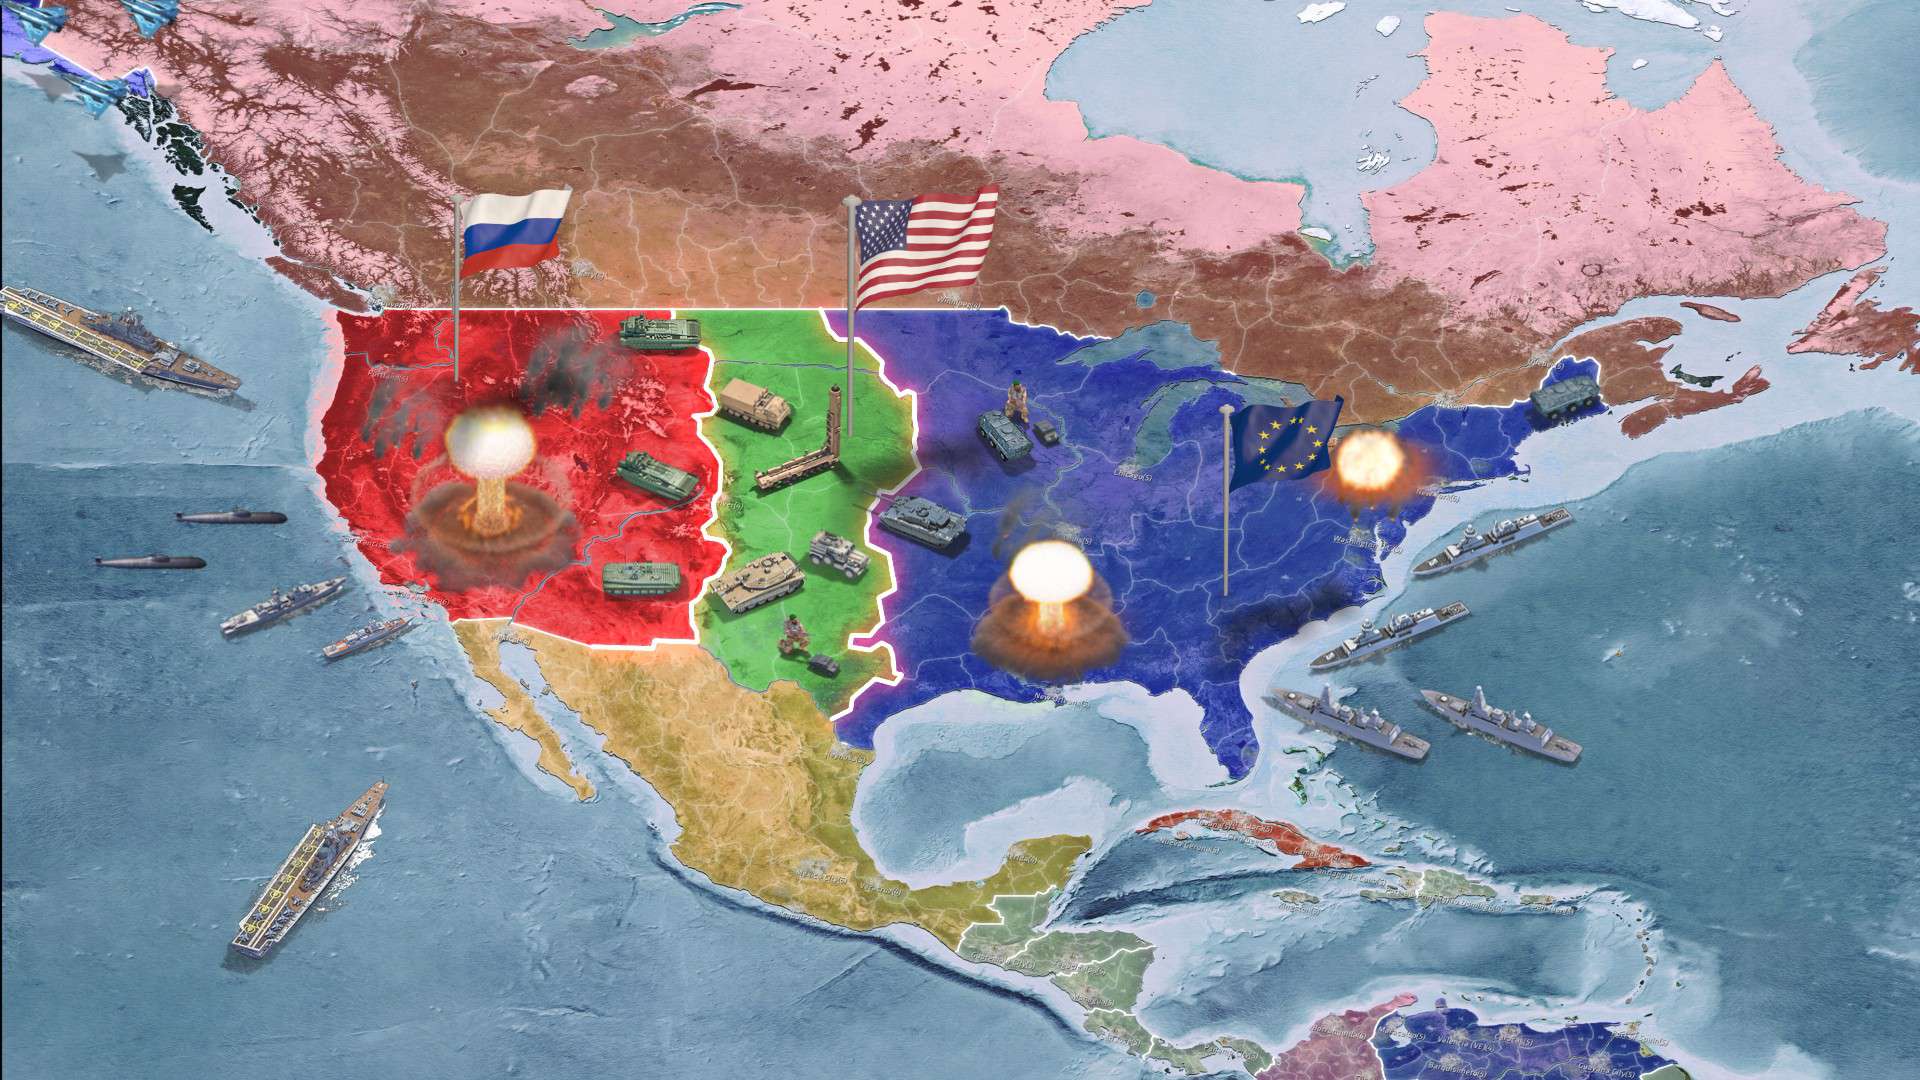 Taboola Ad Example 34682 - The WW3 Strategy Game! Register And Play For Free Right Now, No Download Required.